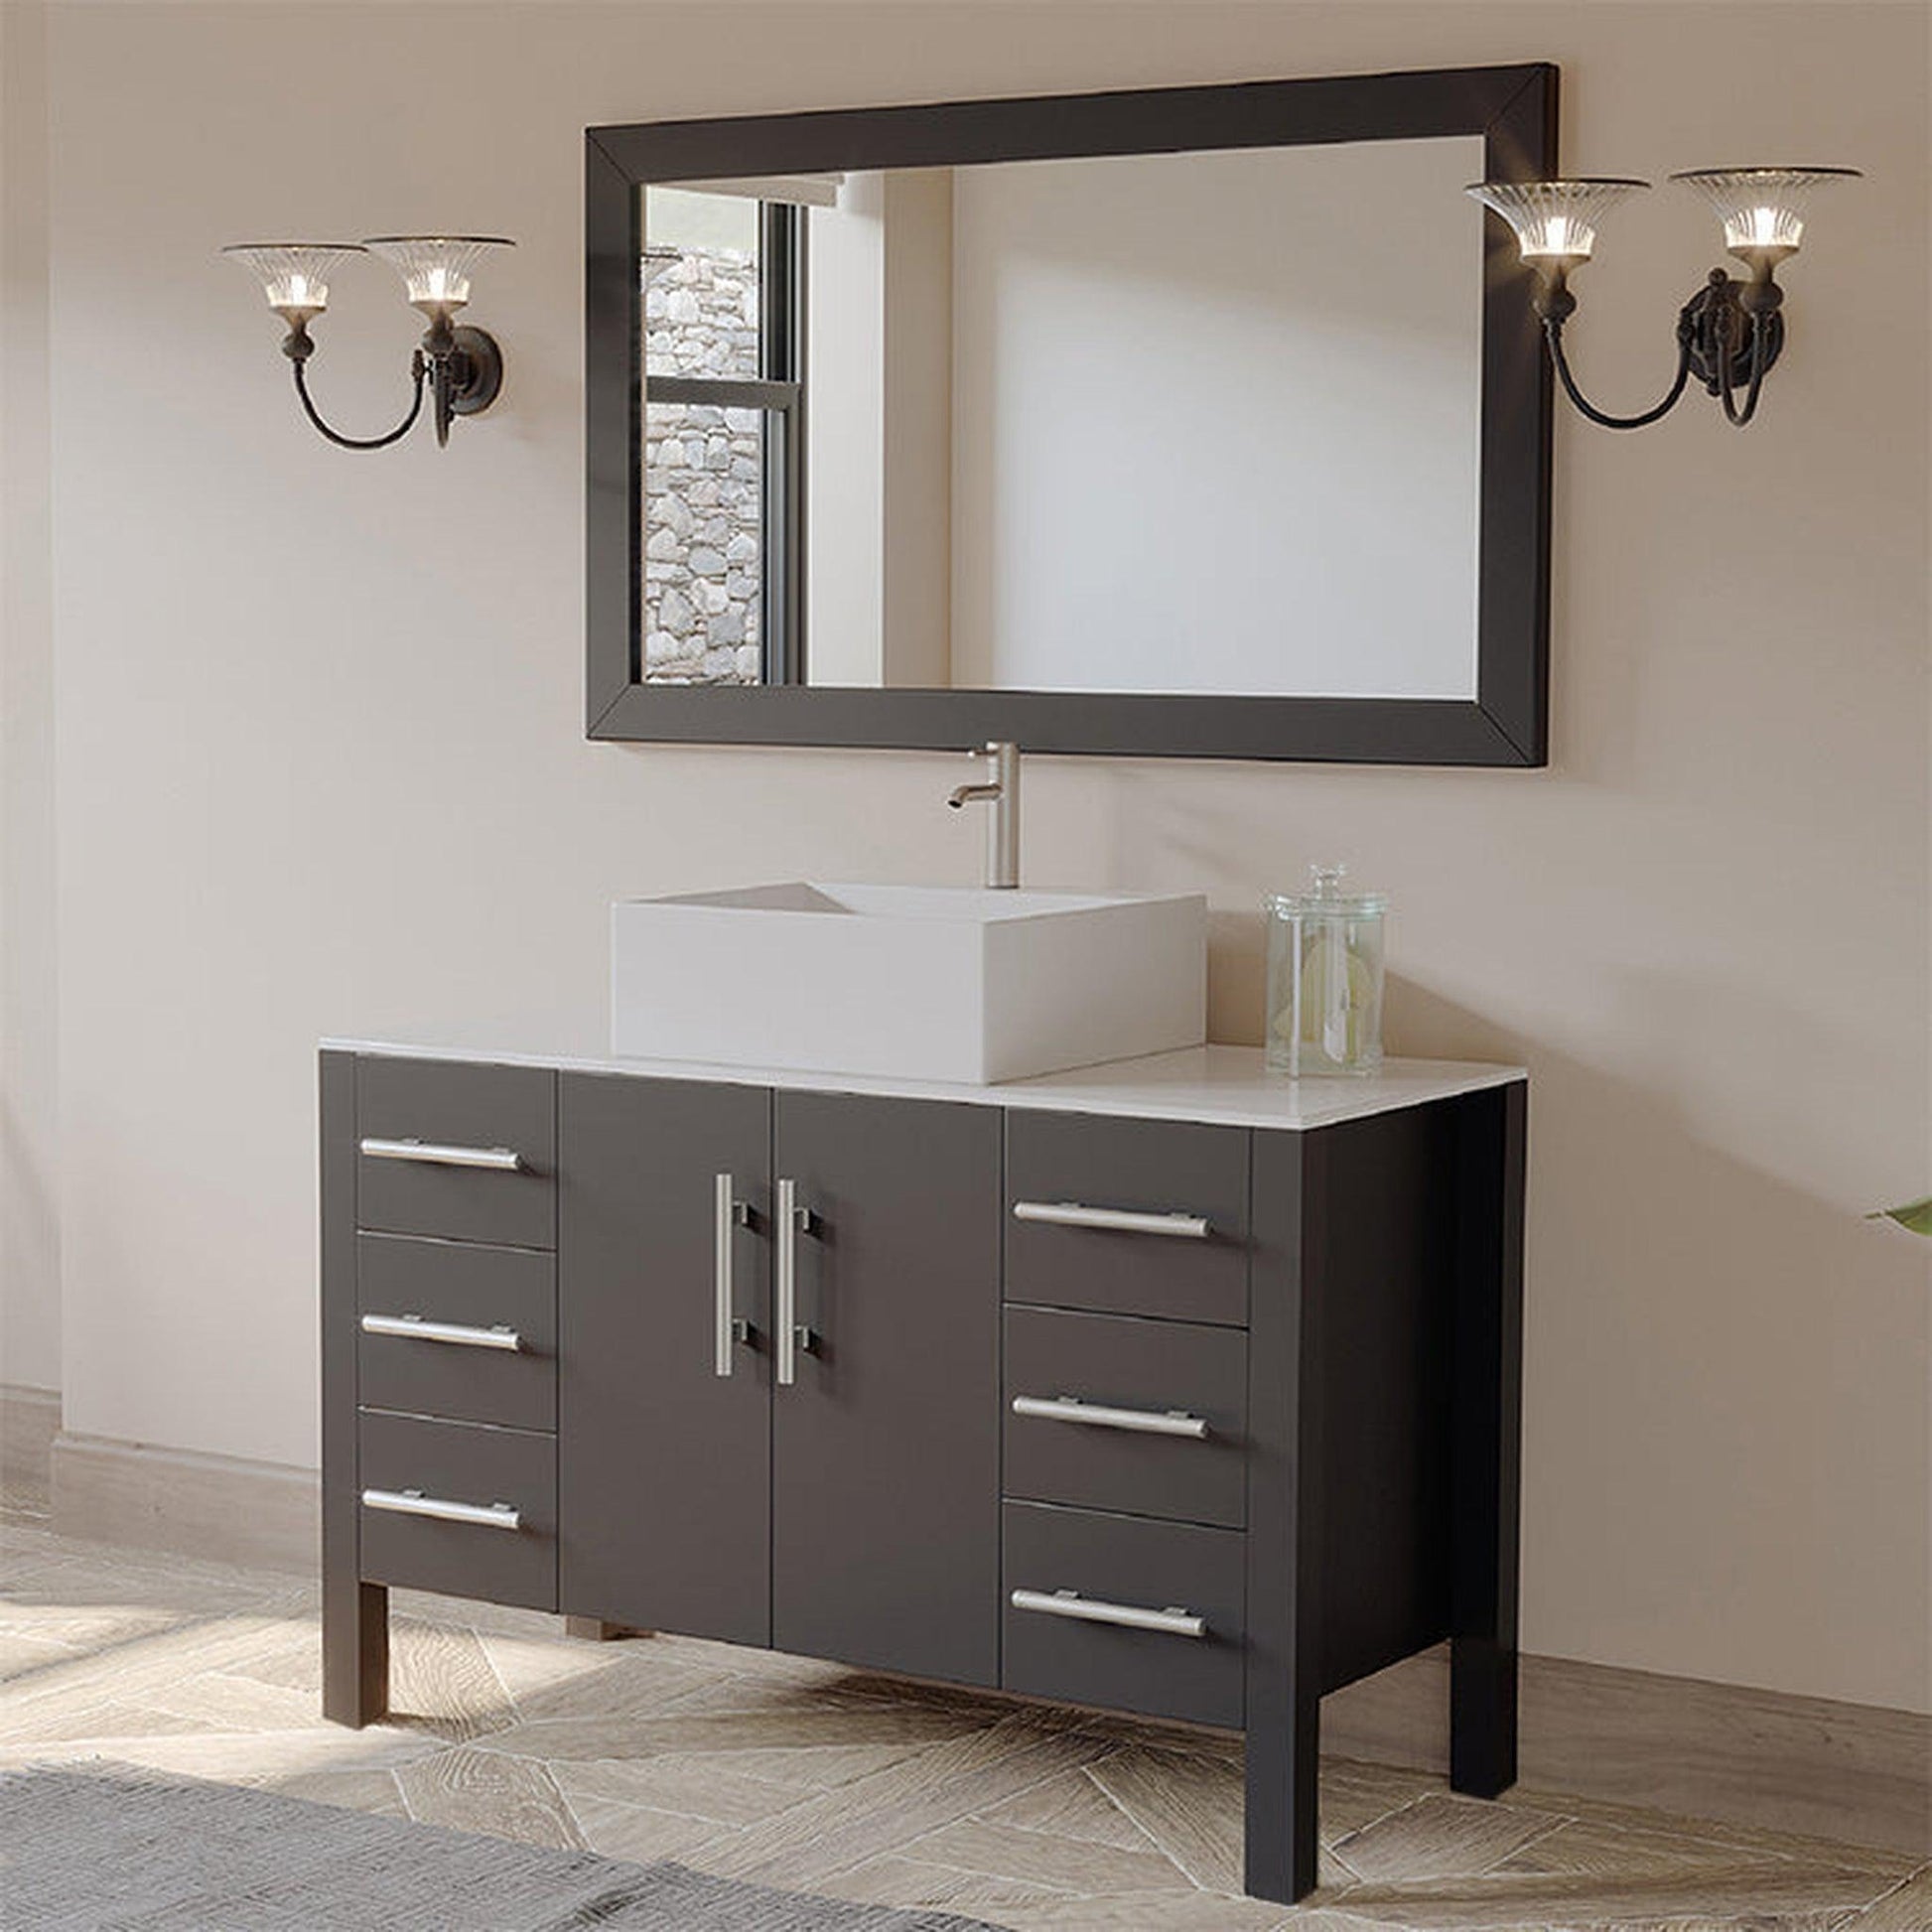 Cambridge Plumbing 48" Black Espresso Wood Single Vanity Set With Porcelain Square Vessel Sink With Faucet Hole And Brushed Nickel Plumbing Finish